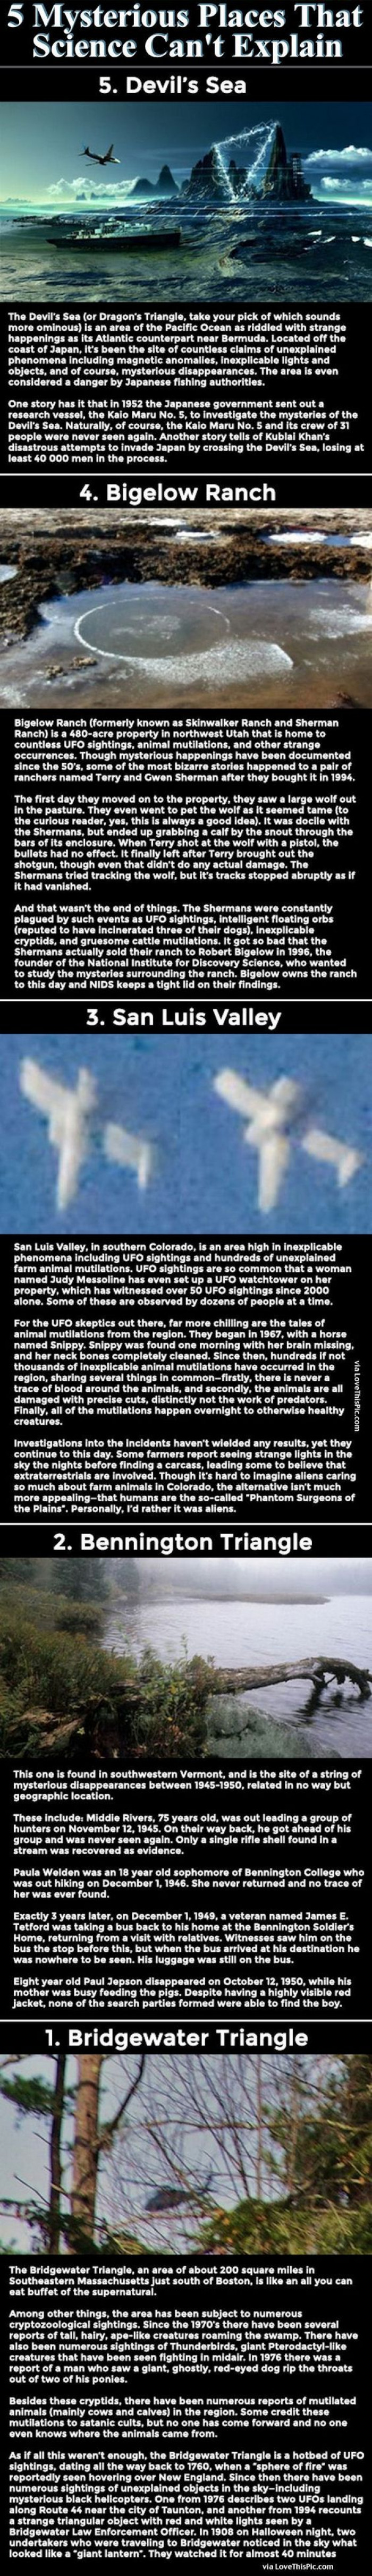 5 Mysterious Locations Science Can Not Explain